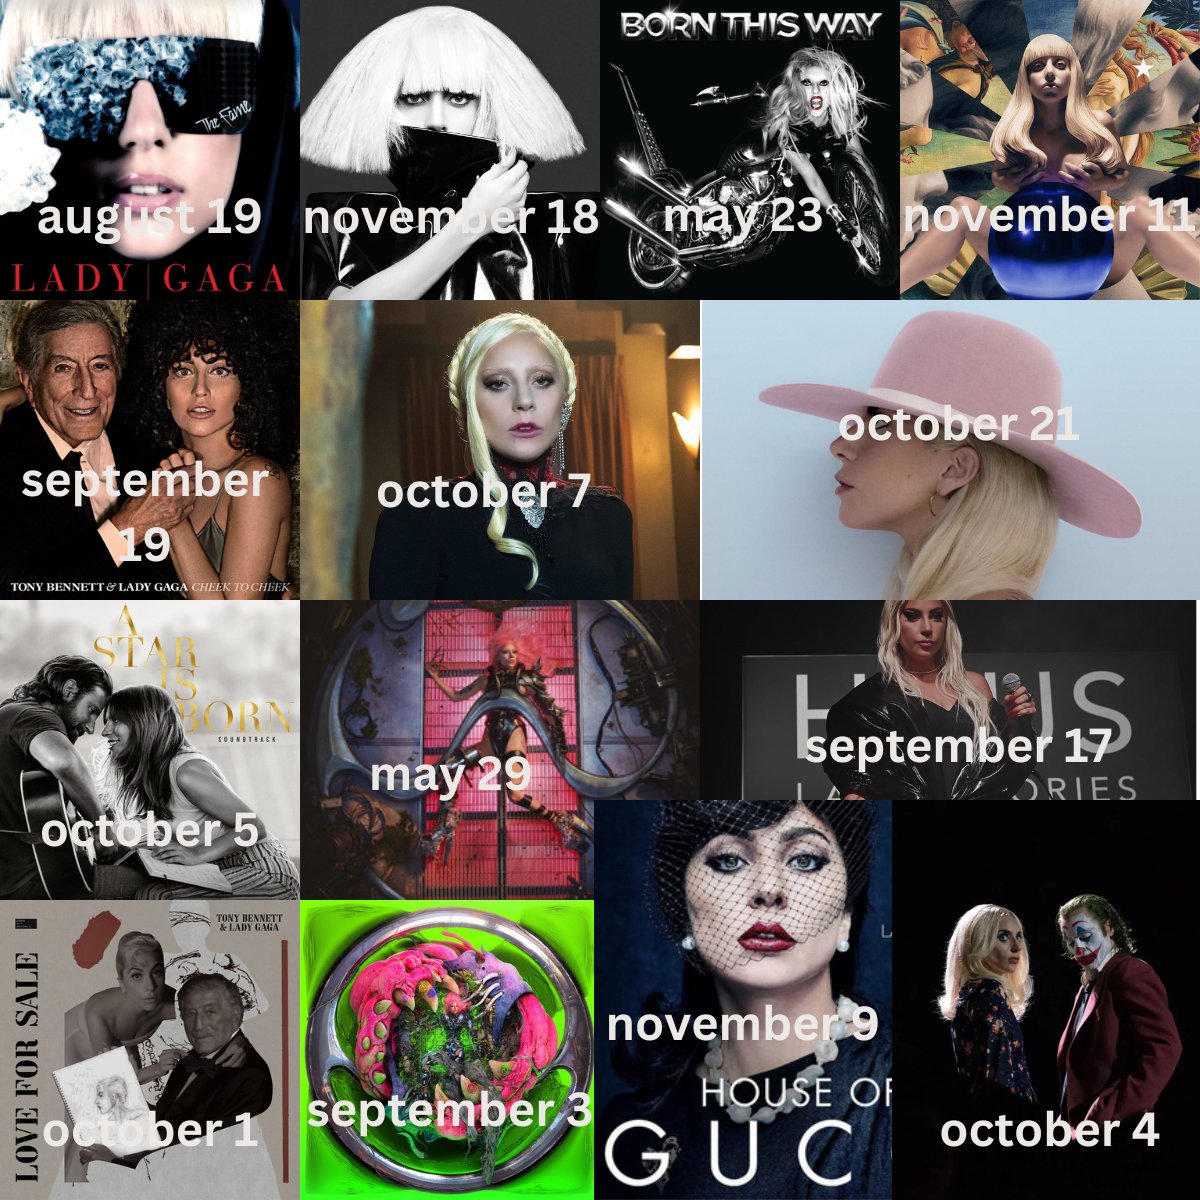 which lady gaga project was released closest to your birthday?